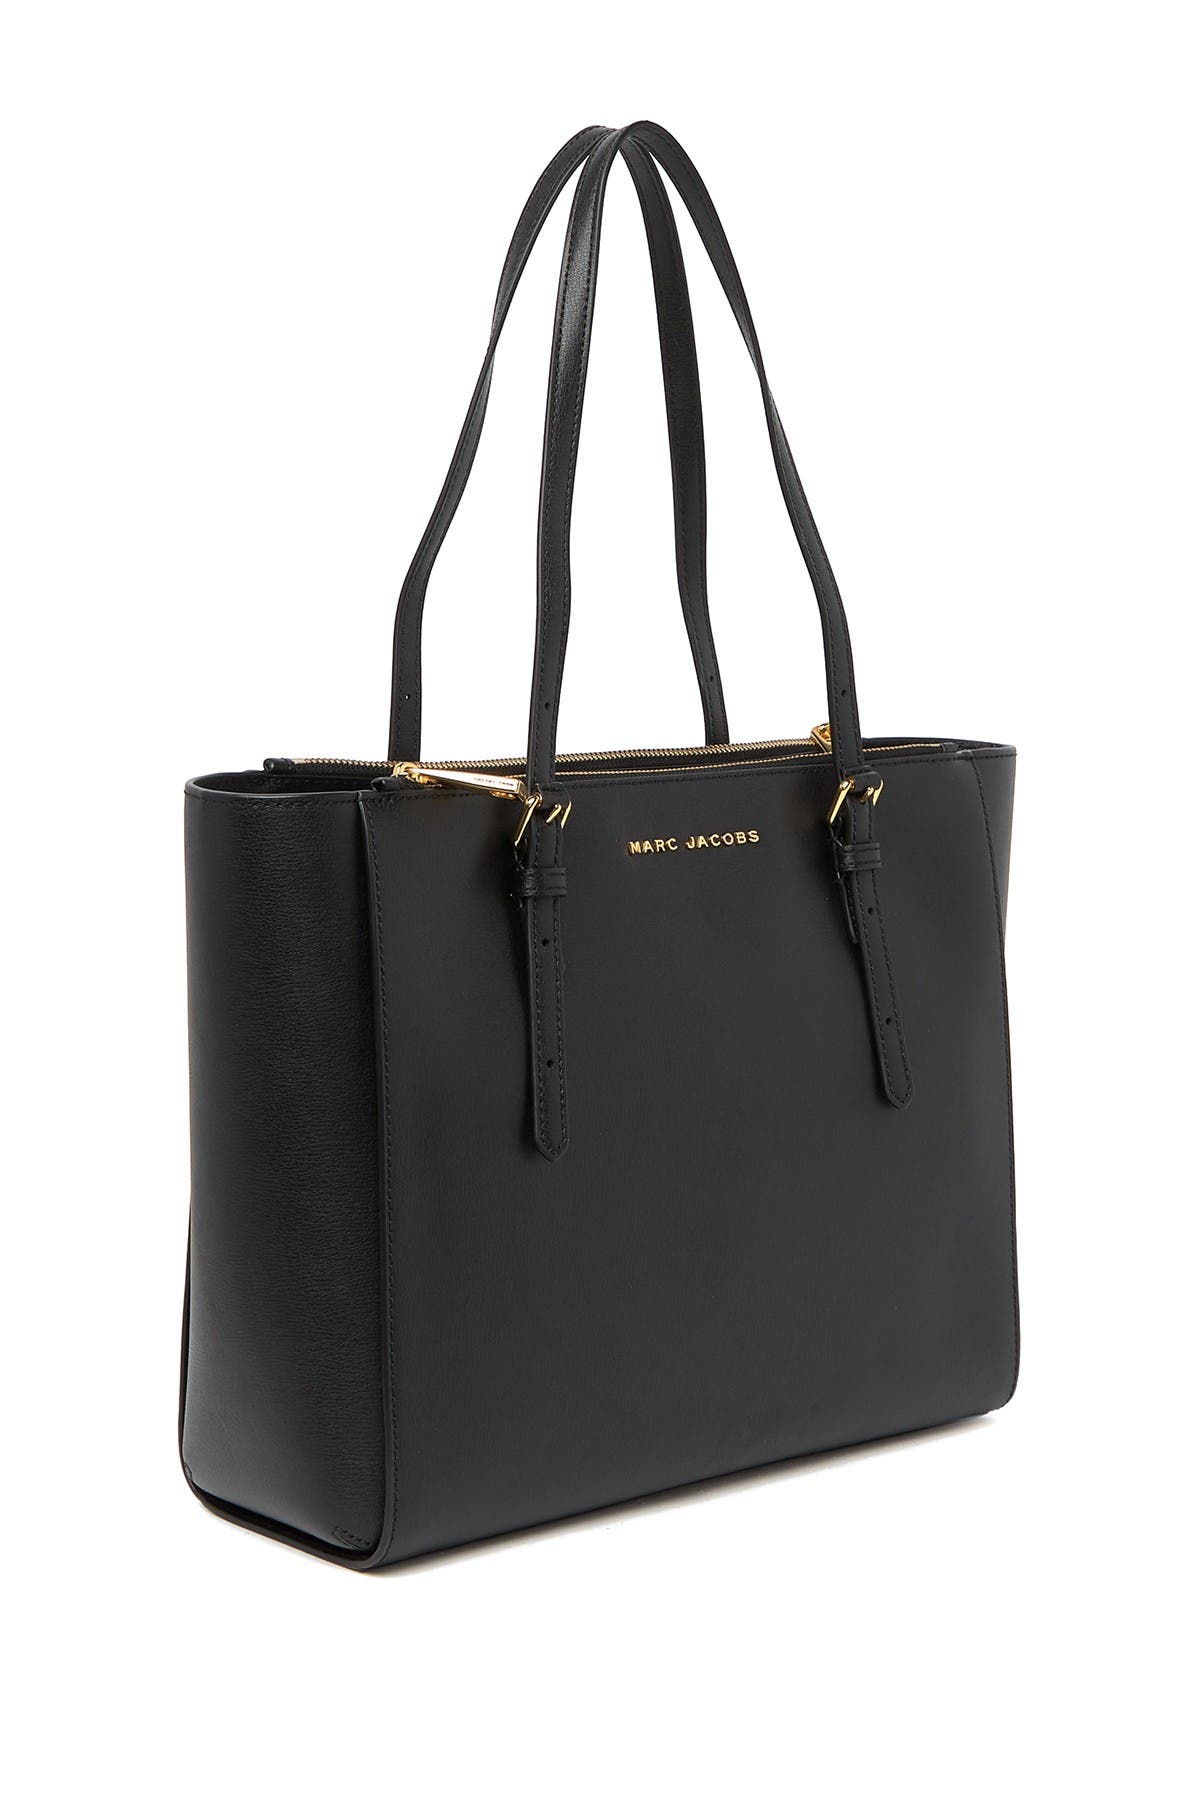 Marc Jacobs Commuter Leather Tote Bag Nordstrom Rack Features include dual leather rolled handles, front zip pocket and. marc jacobs commuter leather tote bag nordstrom rack